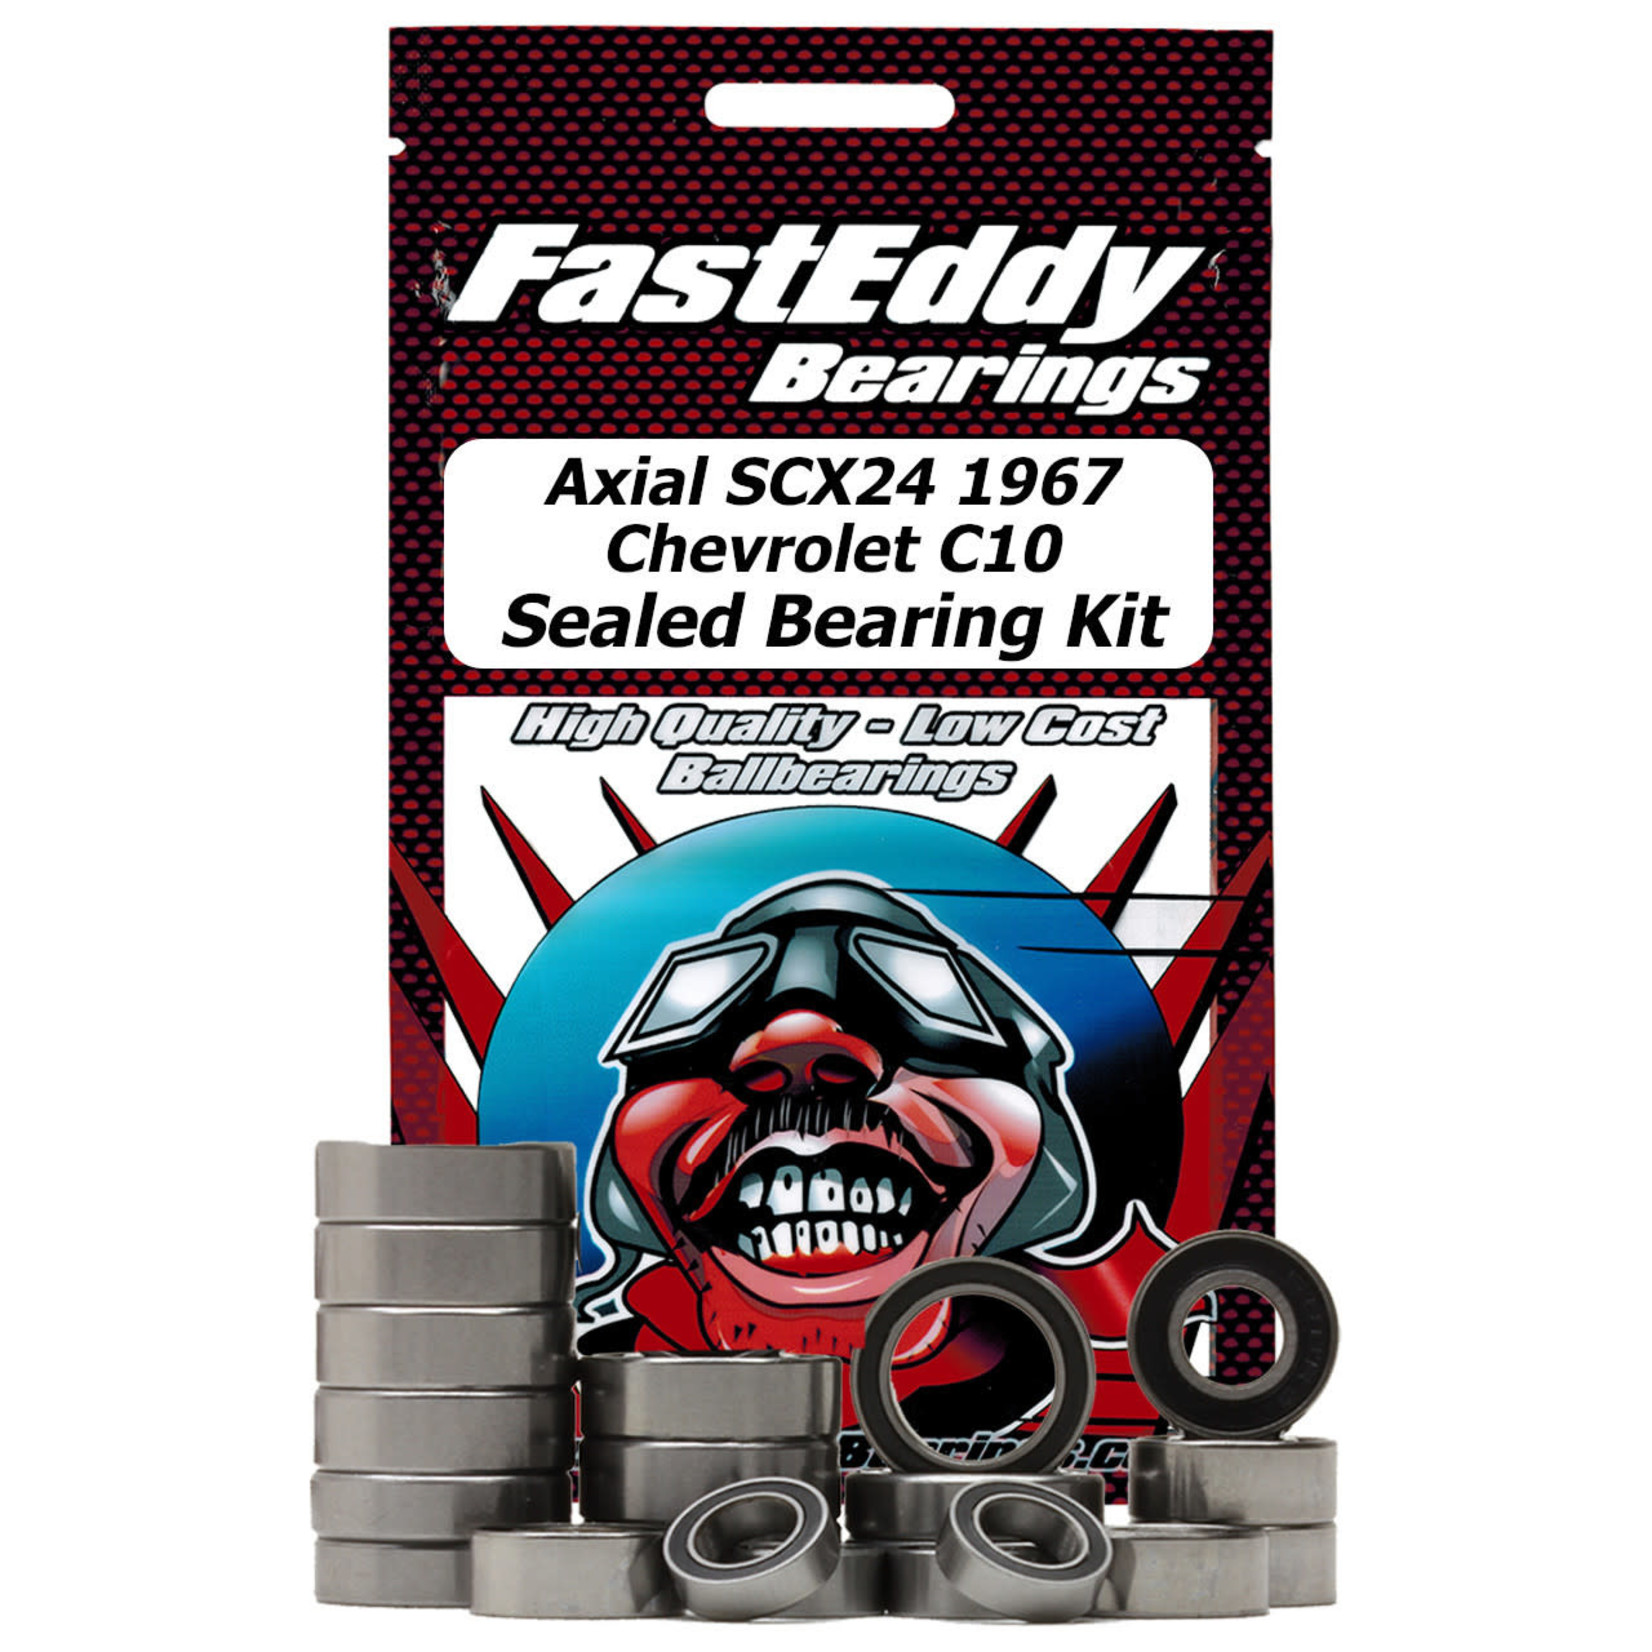 FastEddy FastEddy Bearings Axial SCX24 1967 C10 Sealed Bearing Kit #TFE6522